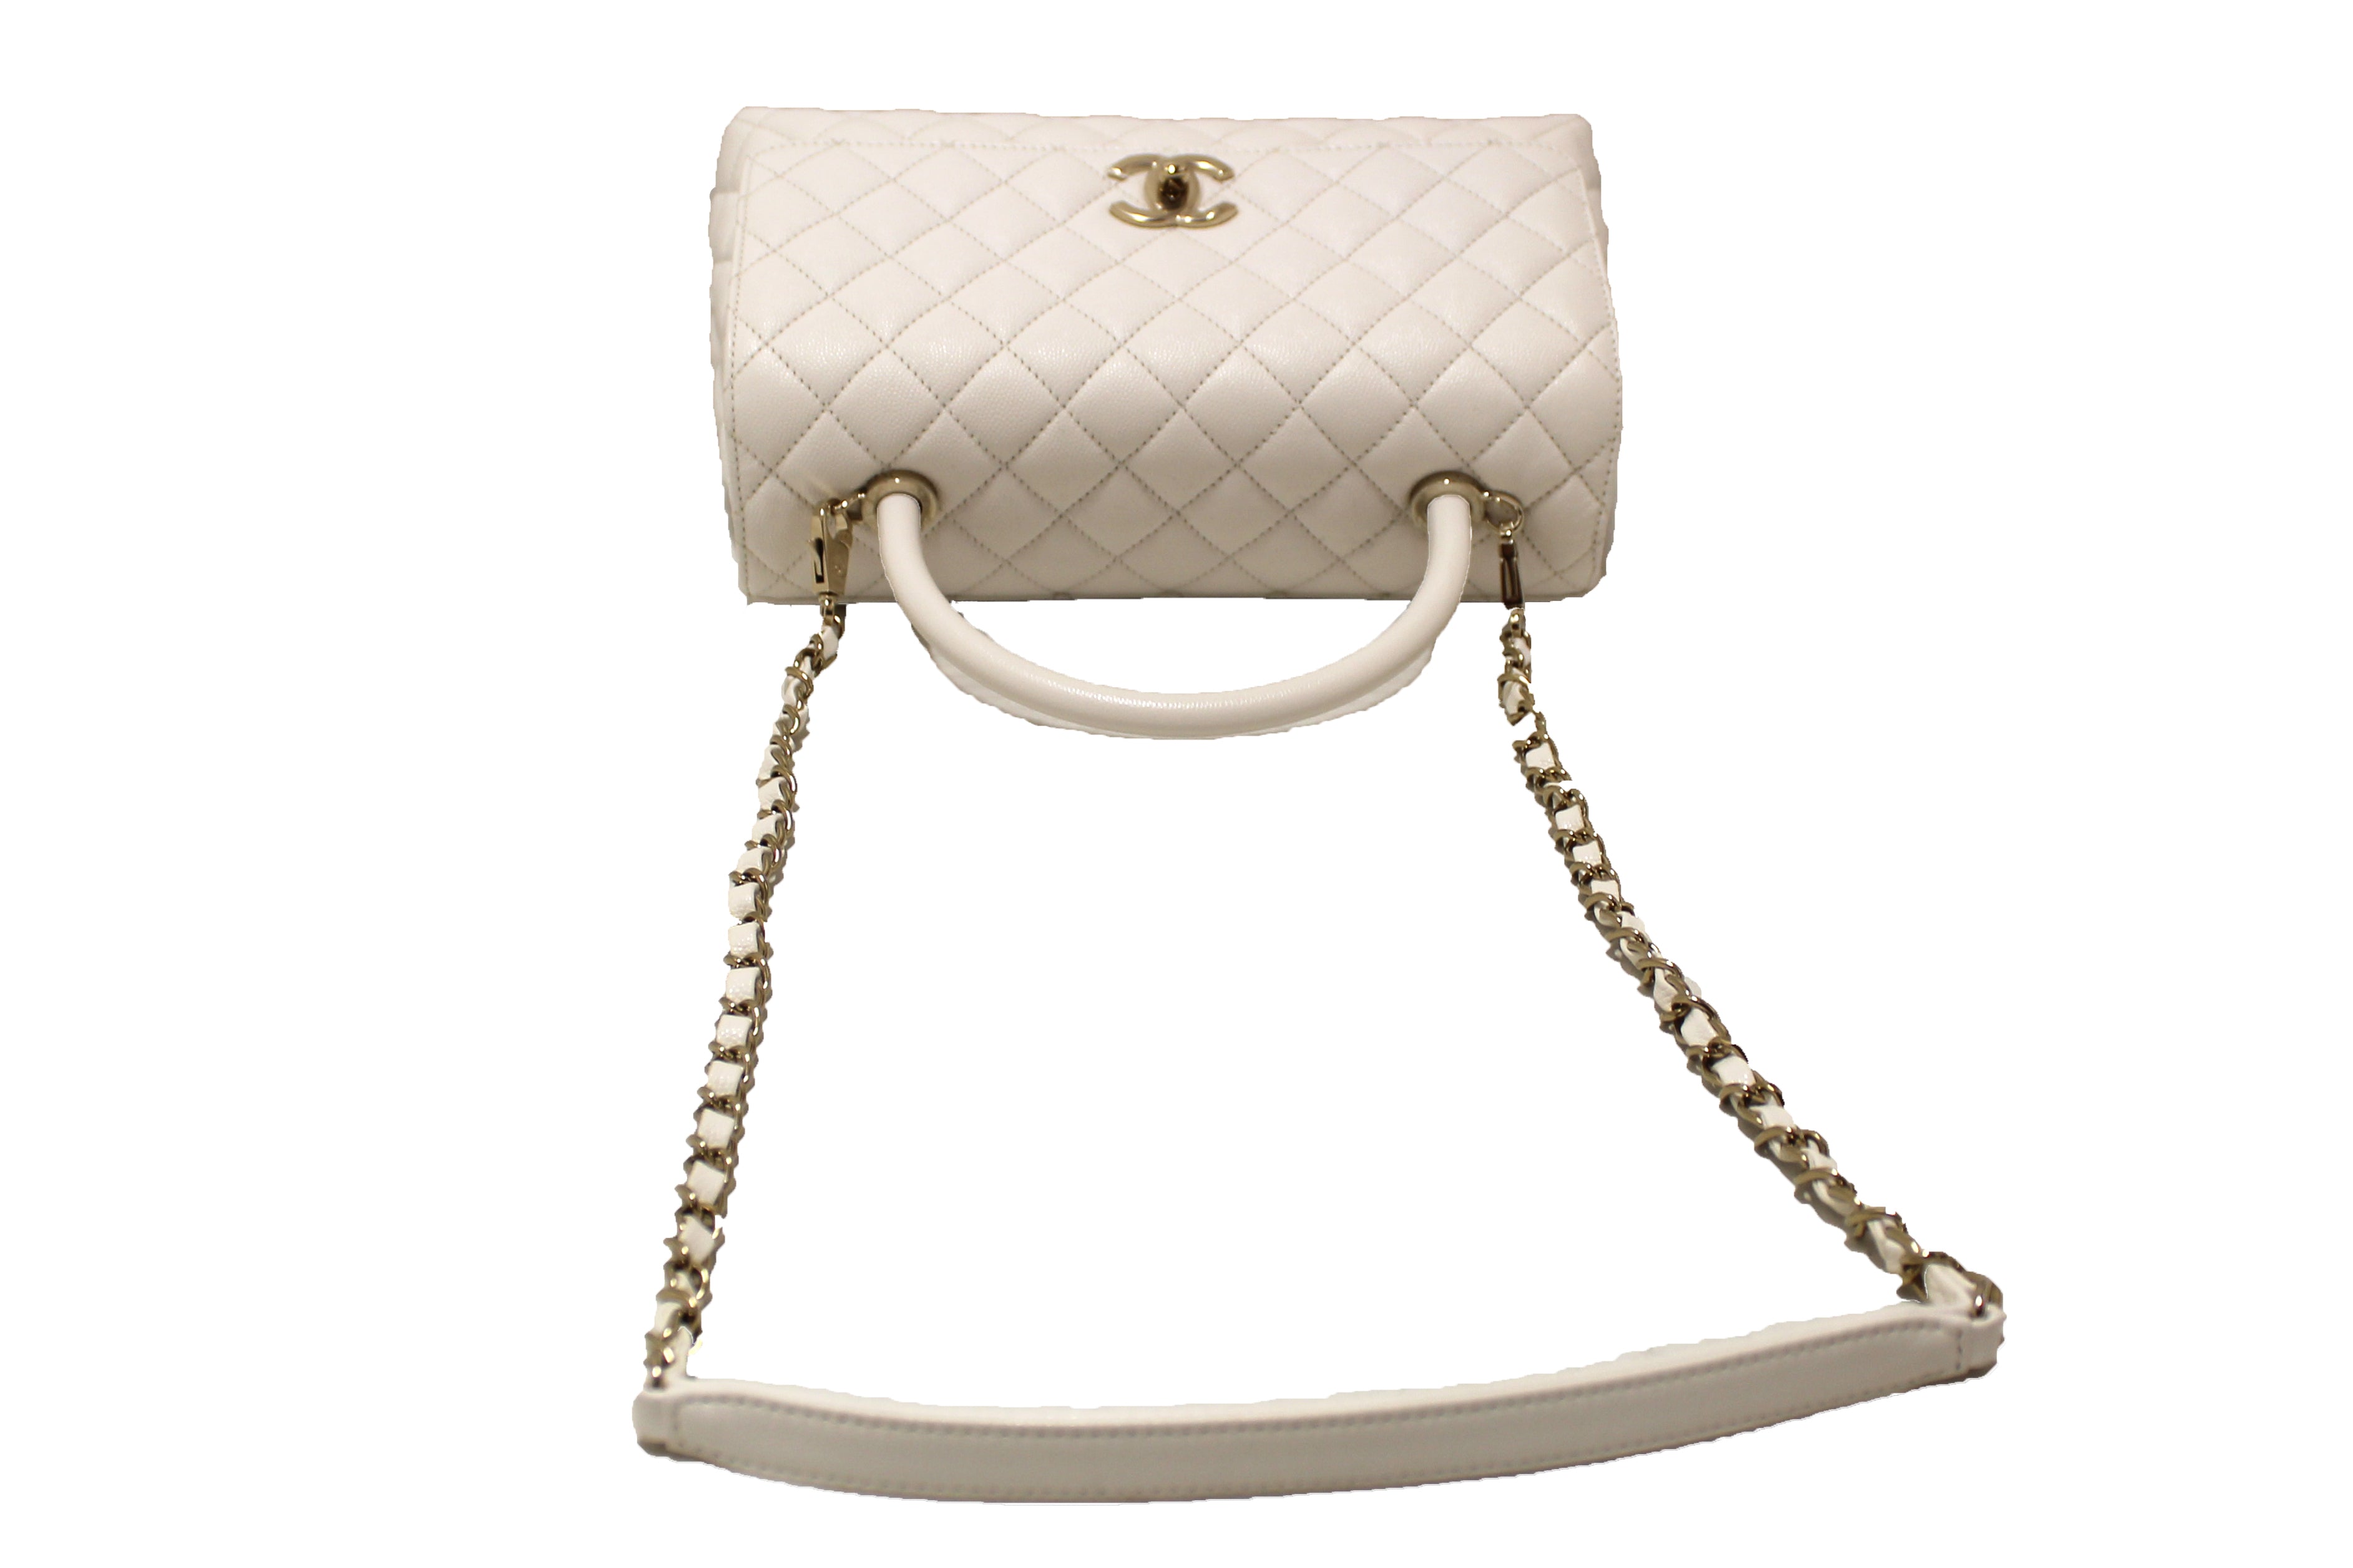 Authentic Chanel White Quilted Caviar Leather Medium CoCo Handle Flap Bag